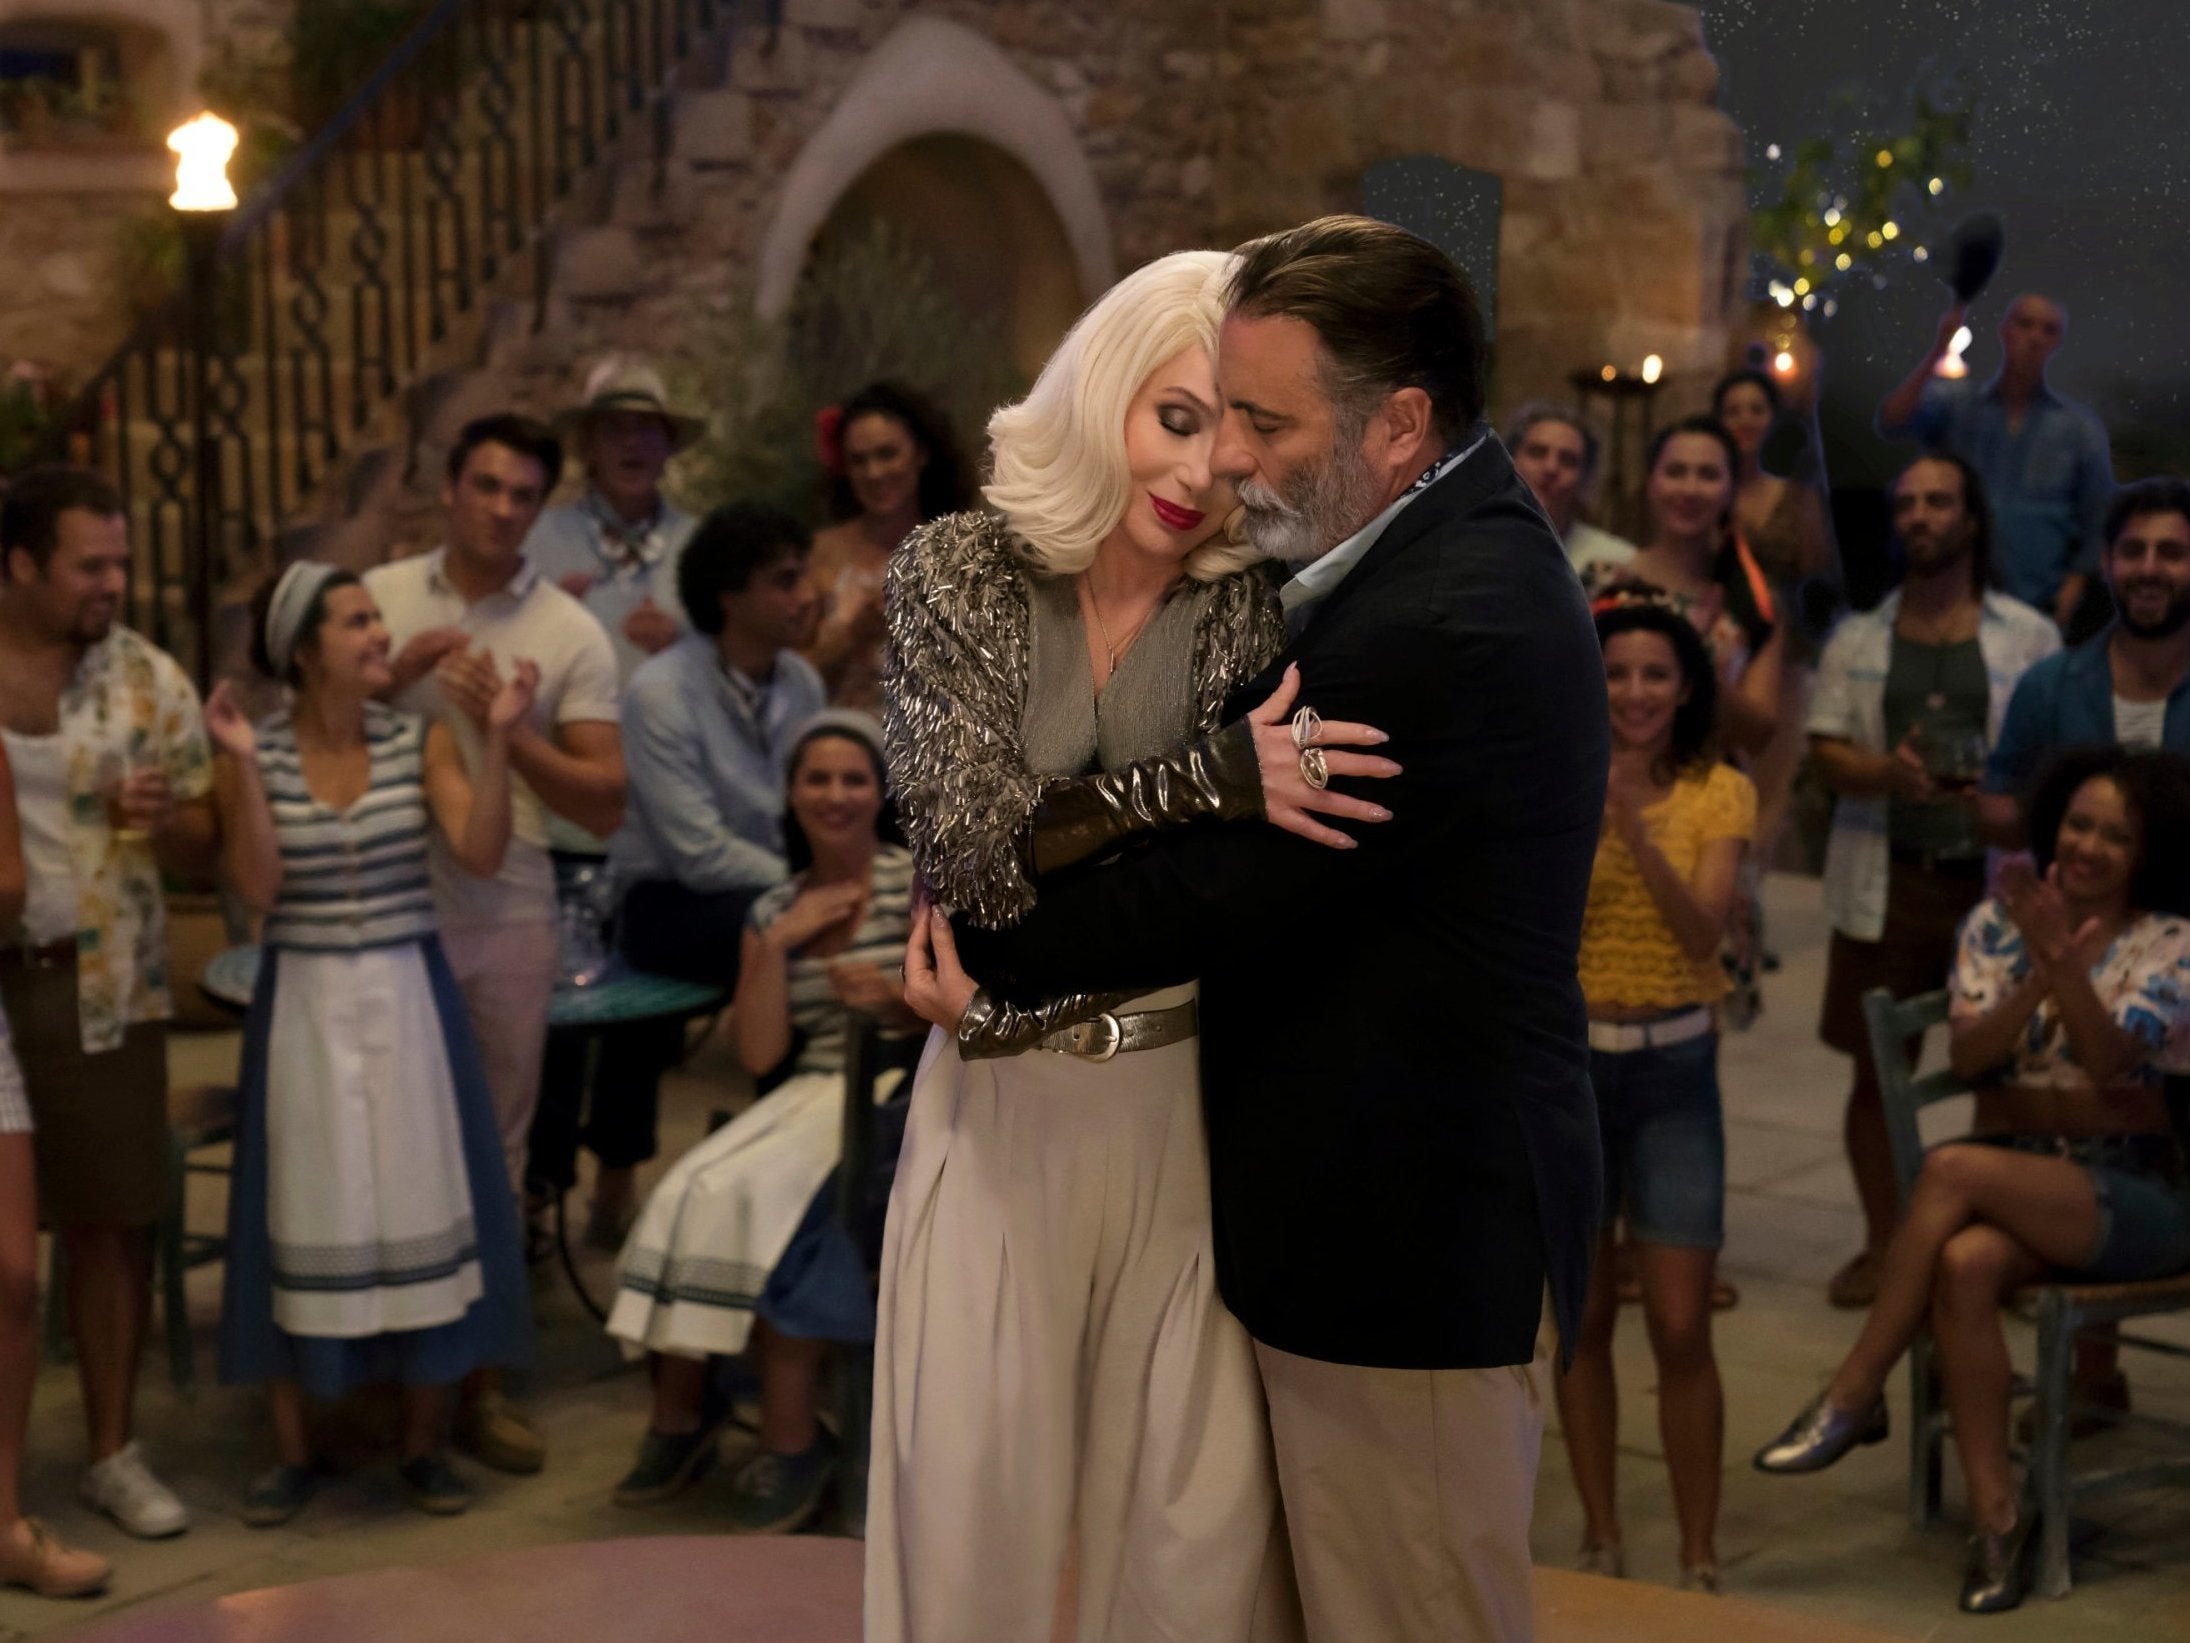 Cher duets with Andy Garcia in a show-stealing scene from the upbeat sequel